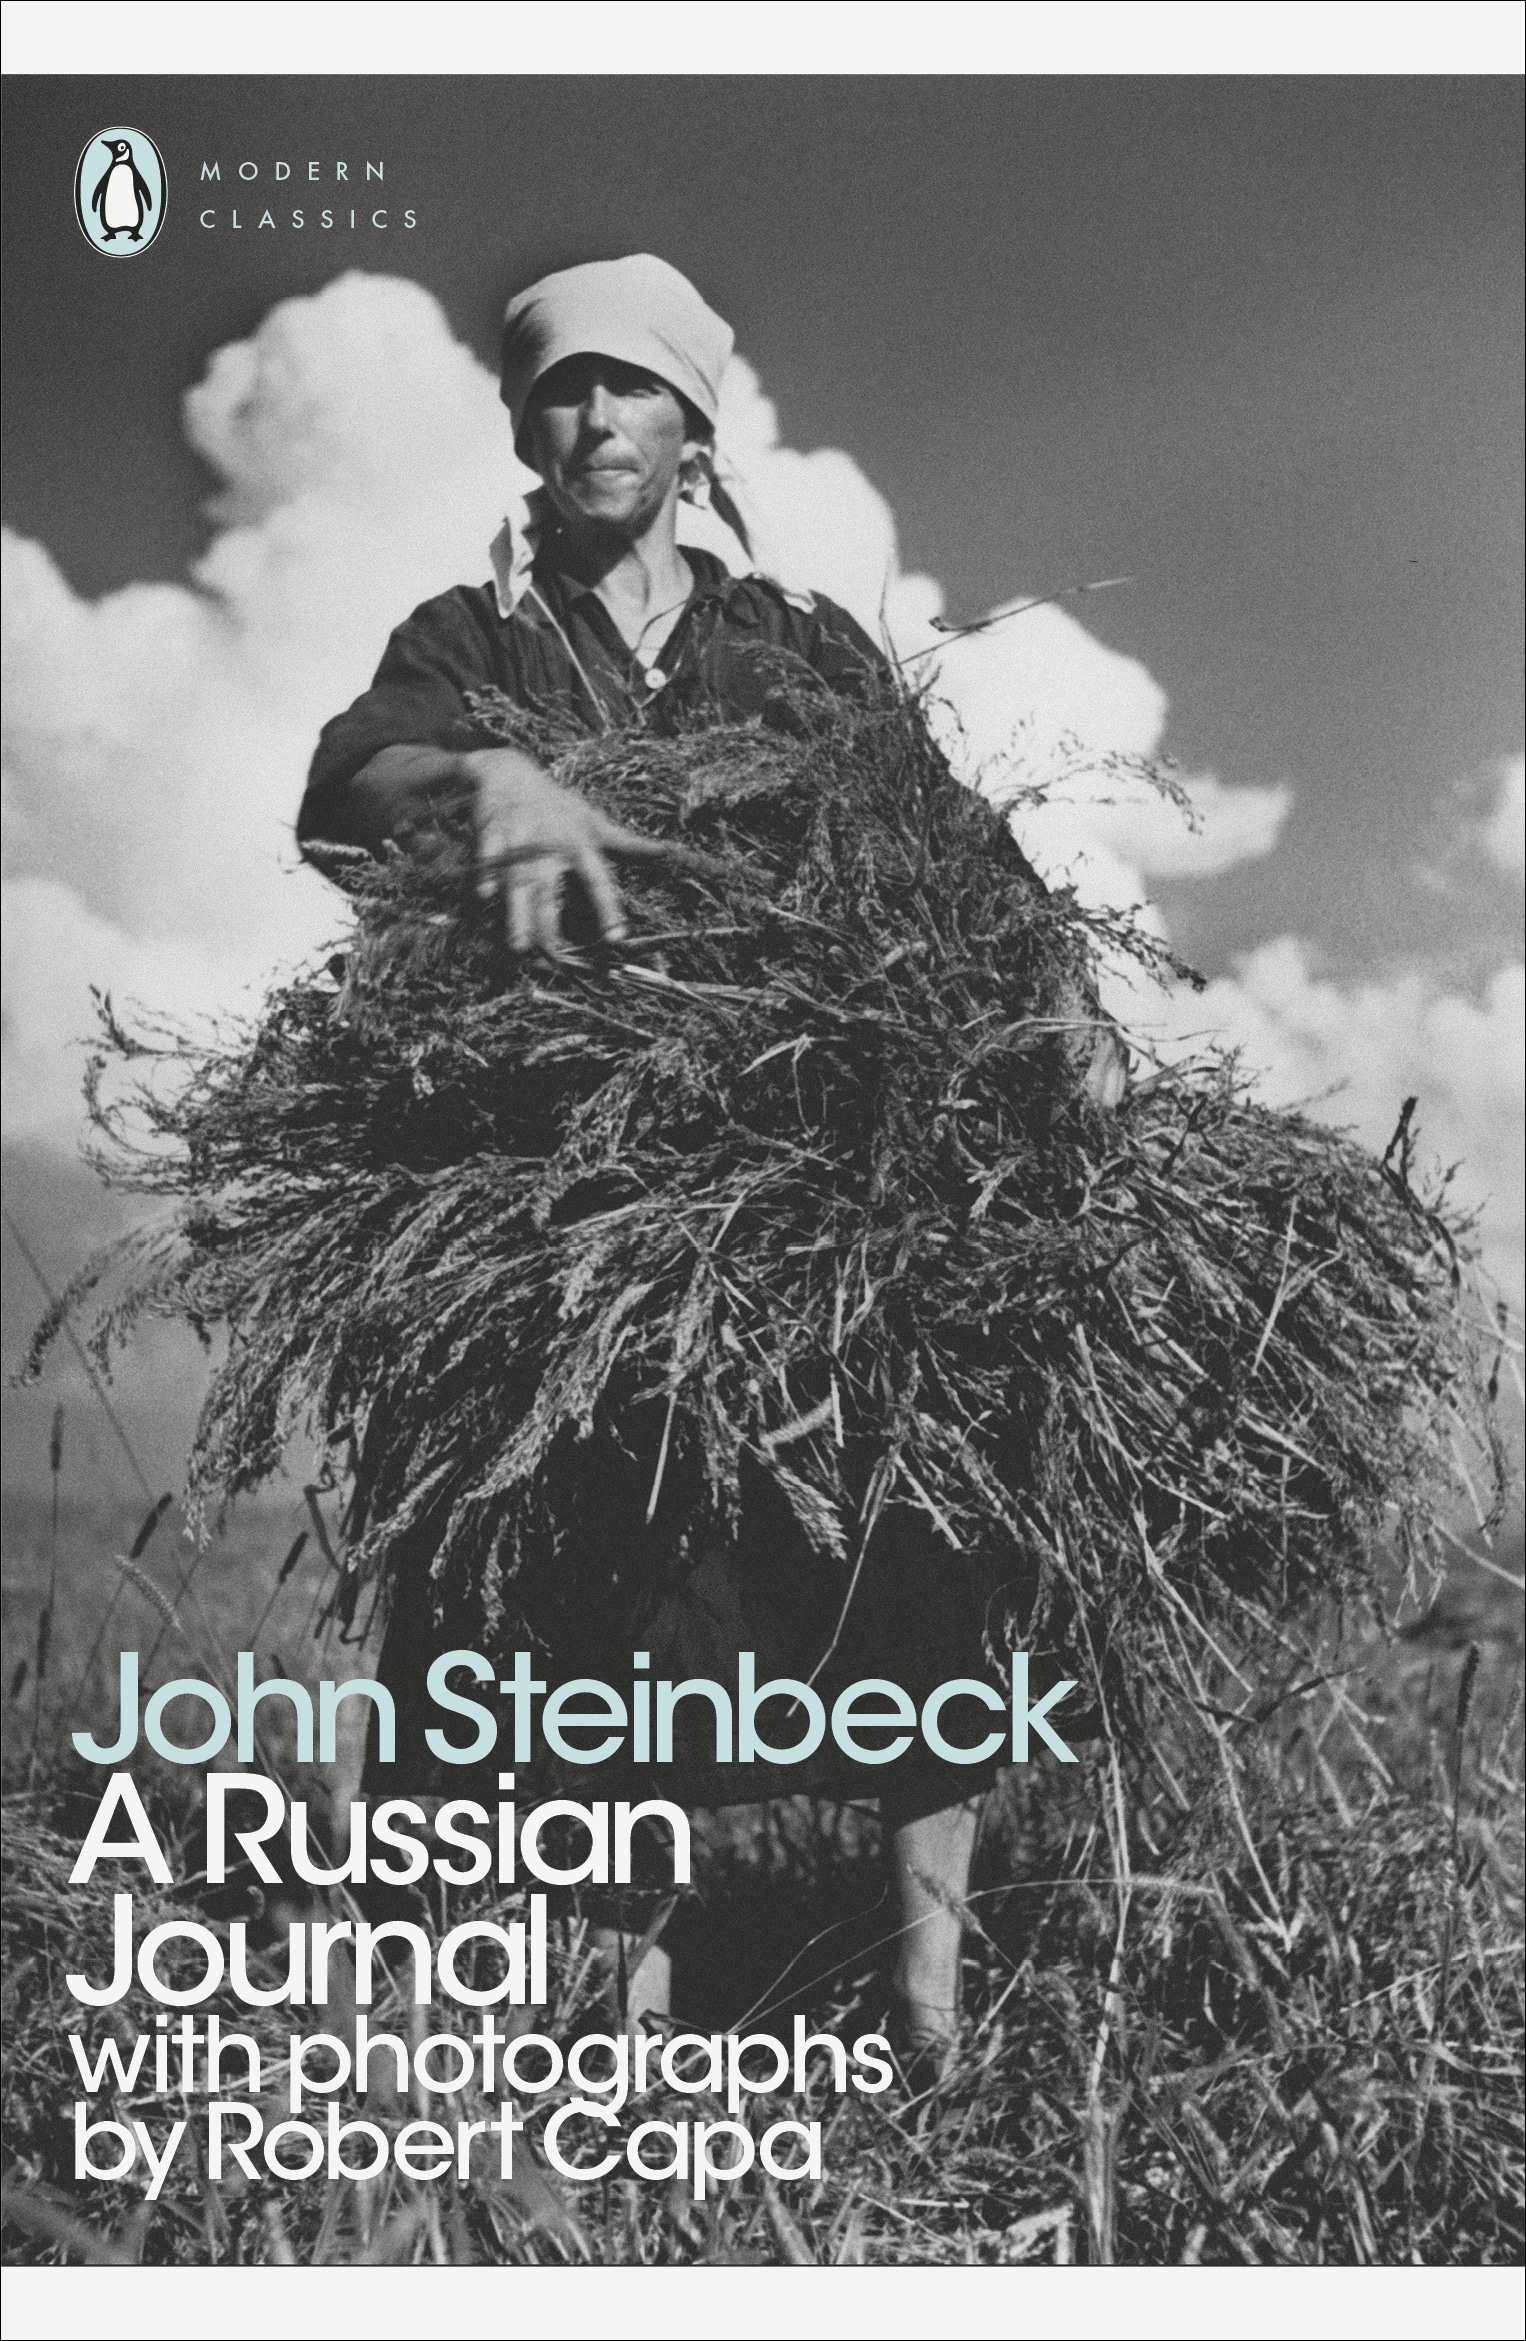 Book “A Russian Journal” by John Steinbeck, Susan Shillinglaw — May 3, 2001